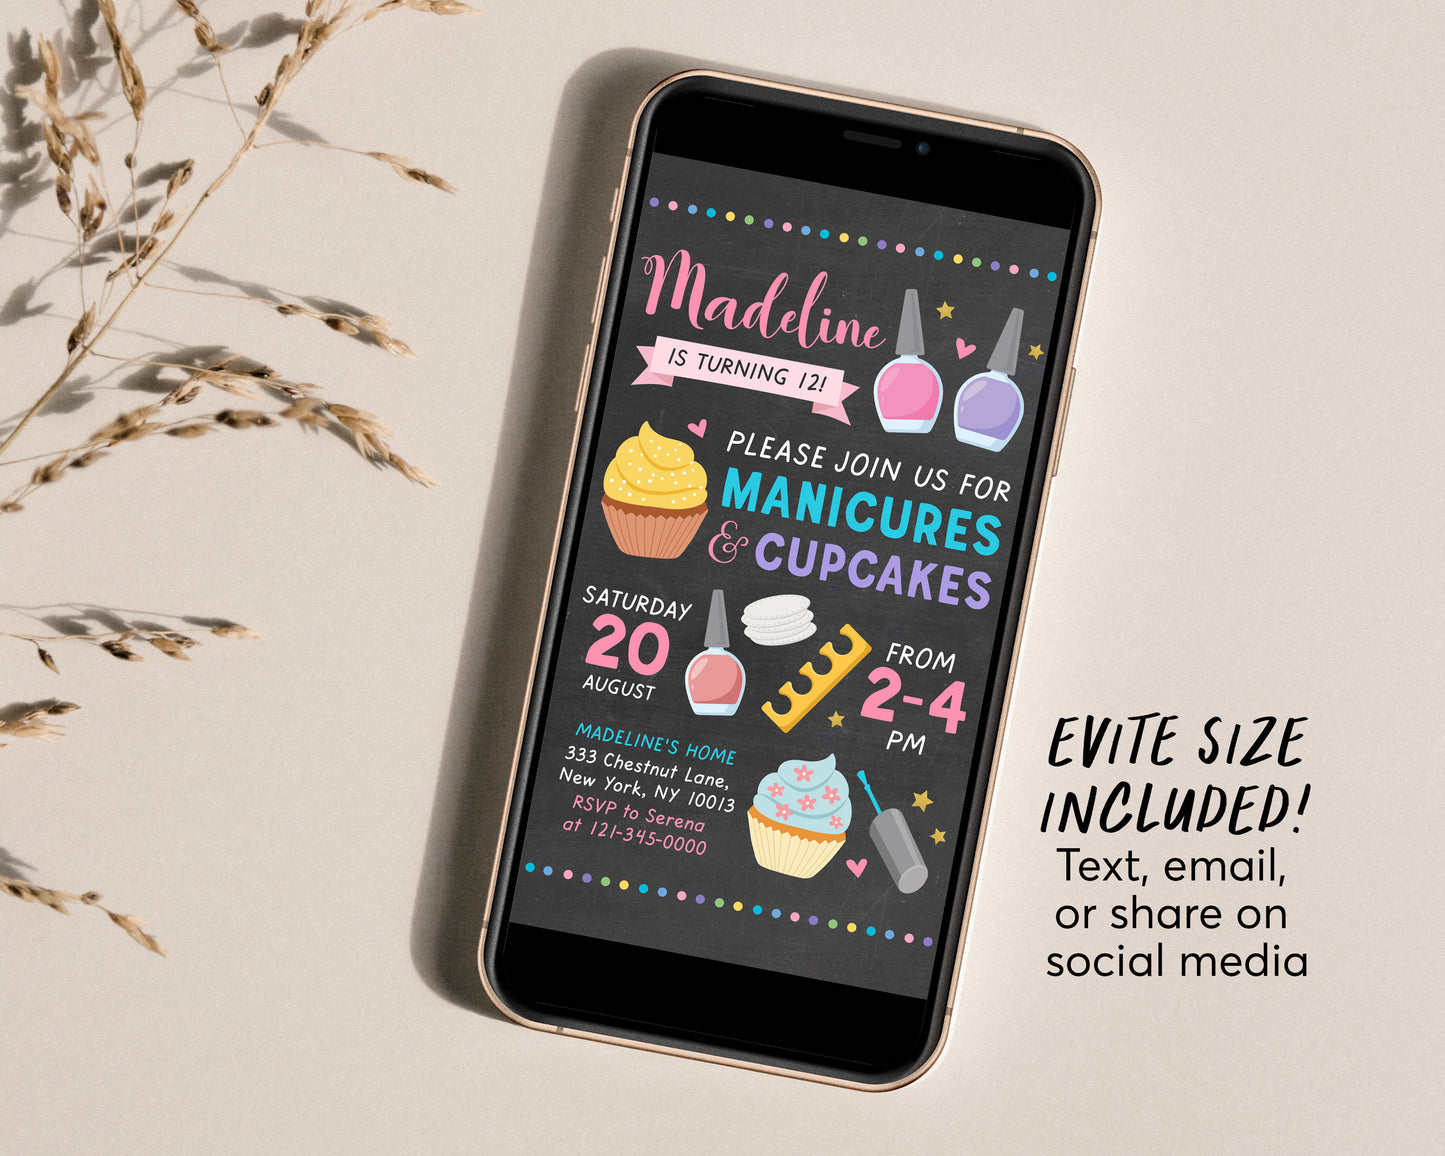 Manicures And Cupcakes Birthday Party Invitation Editable Template, Pedicures Mani Pedi Spa Day Chalkboard Invite, Girl Teen Tween Printable